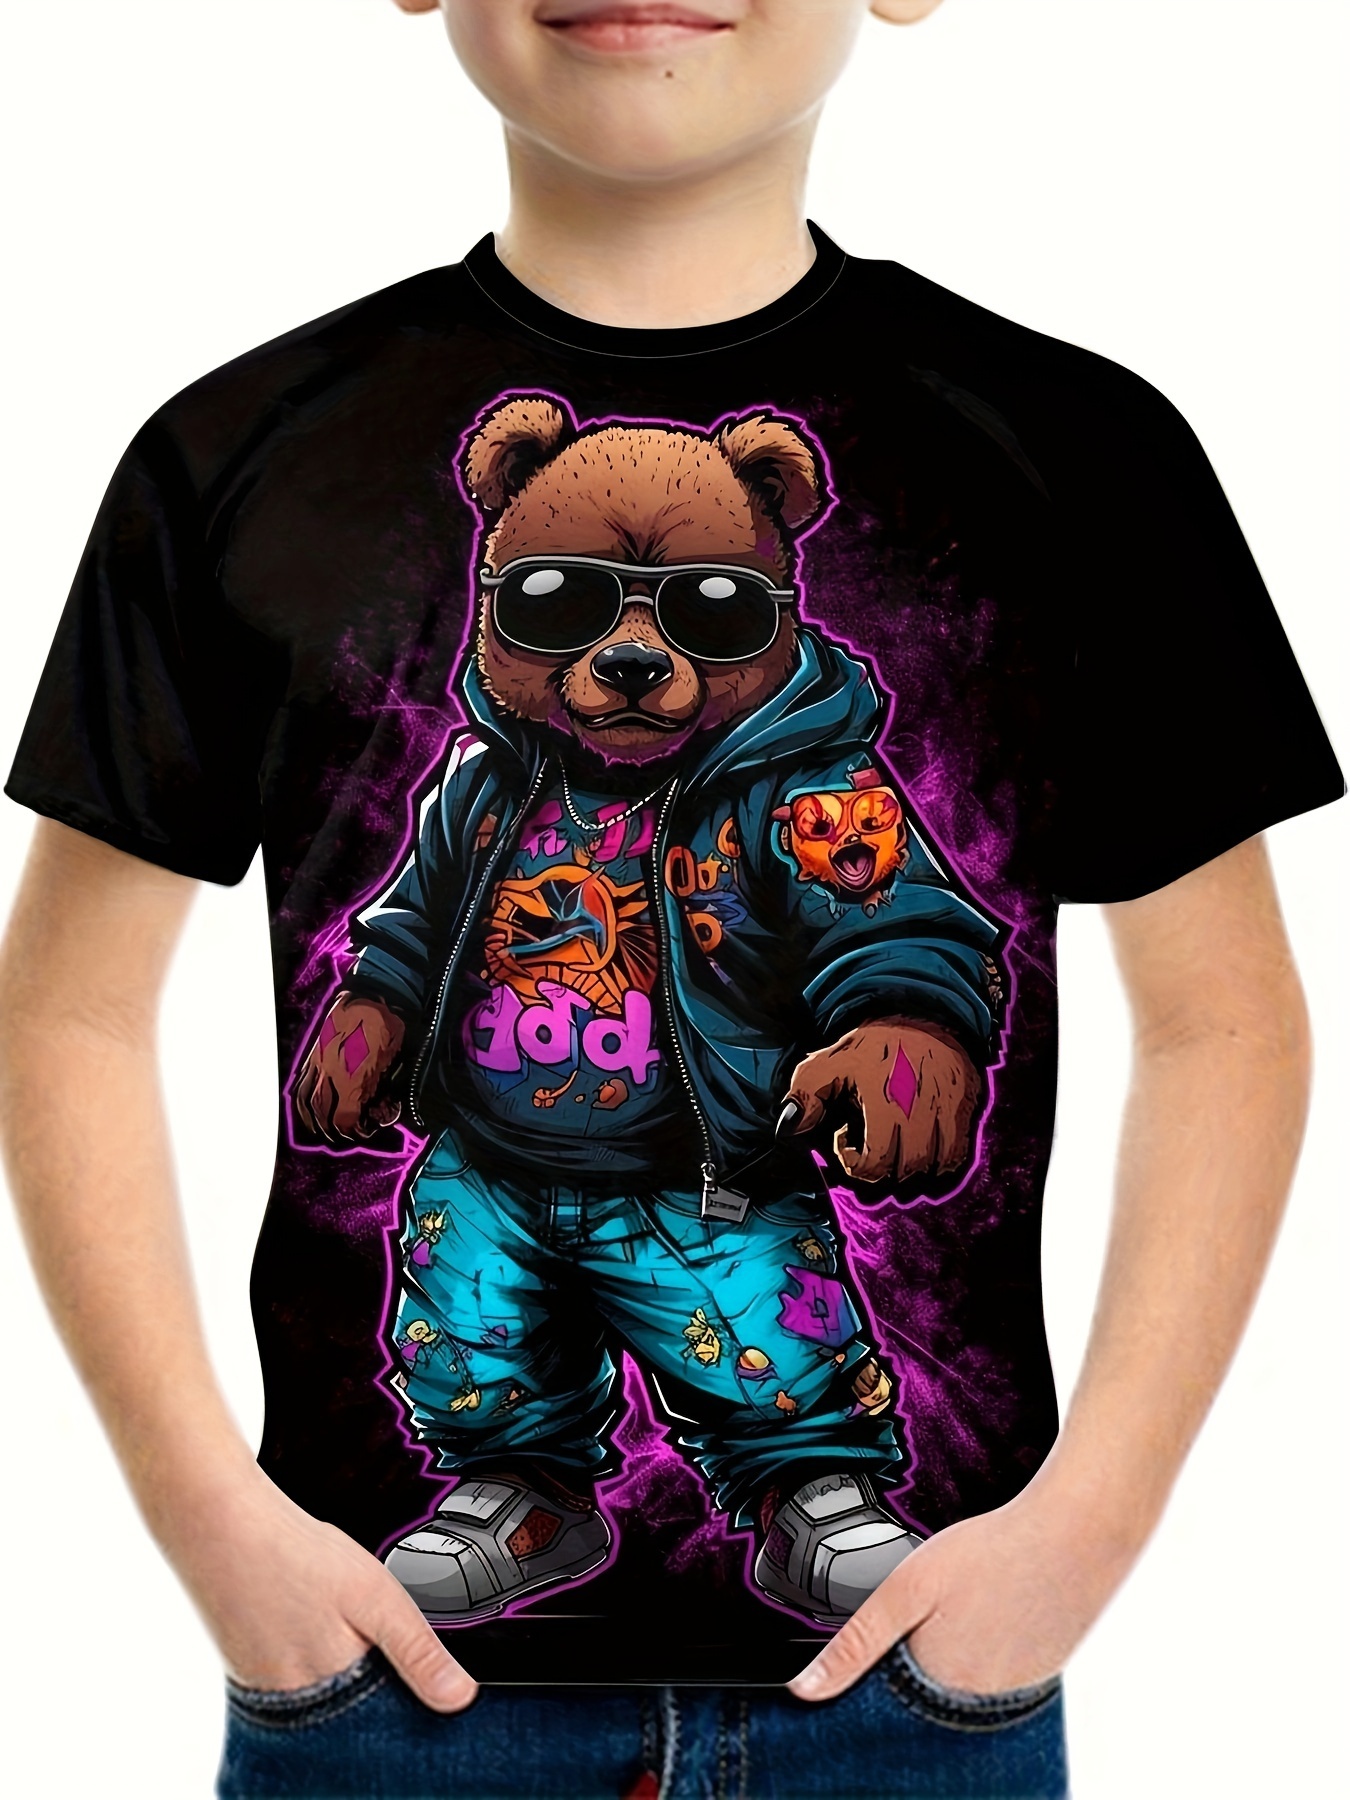 Cartoon Bear Graphic T-shirt for Boys - 3D Digital Print, Active and  Stretchy Short Sleeve Tee for Summer Outdoor Fun - Kid's Clothing with Fun  and Pl